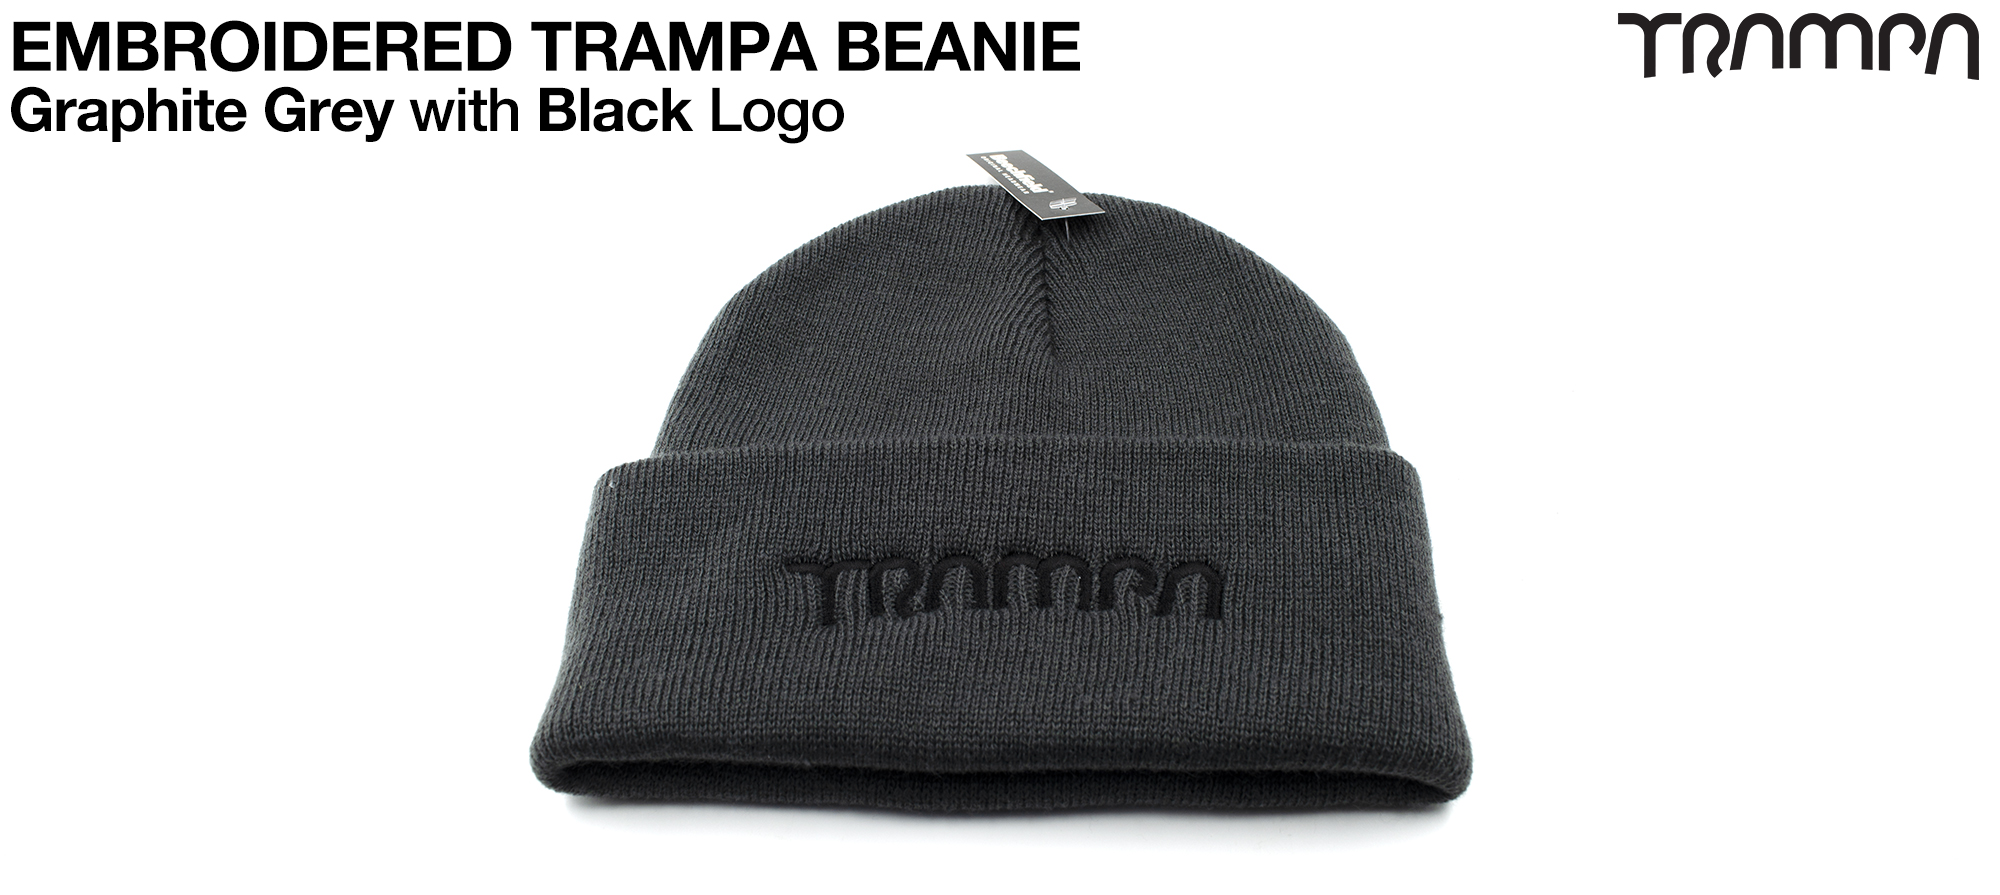 Graphite GREY Woolly hat with BLACK TRAMPA logo